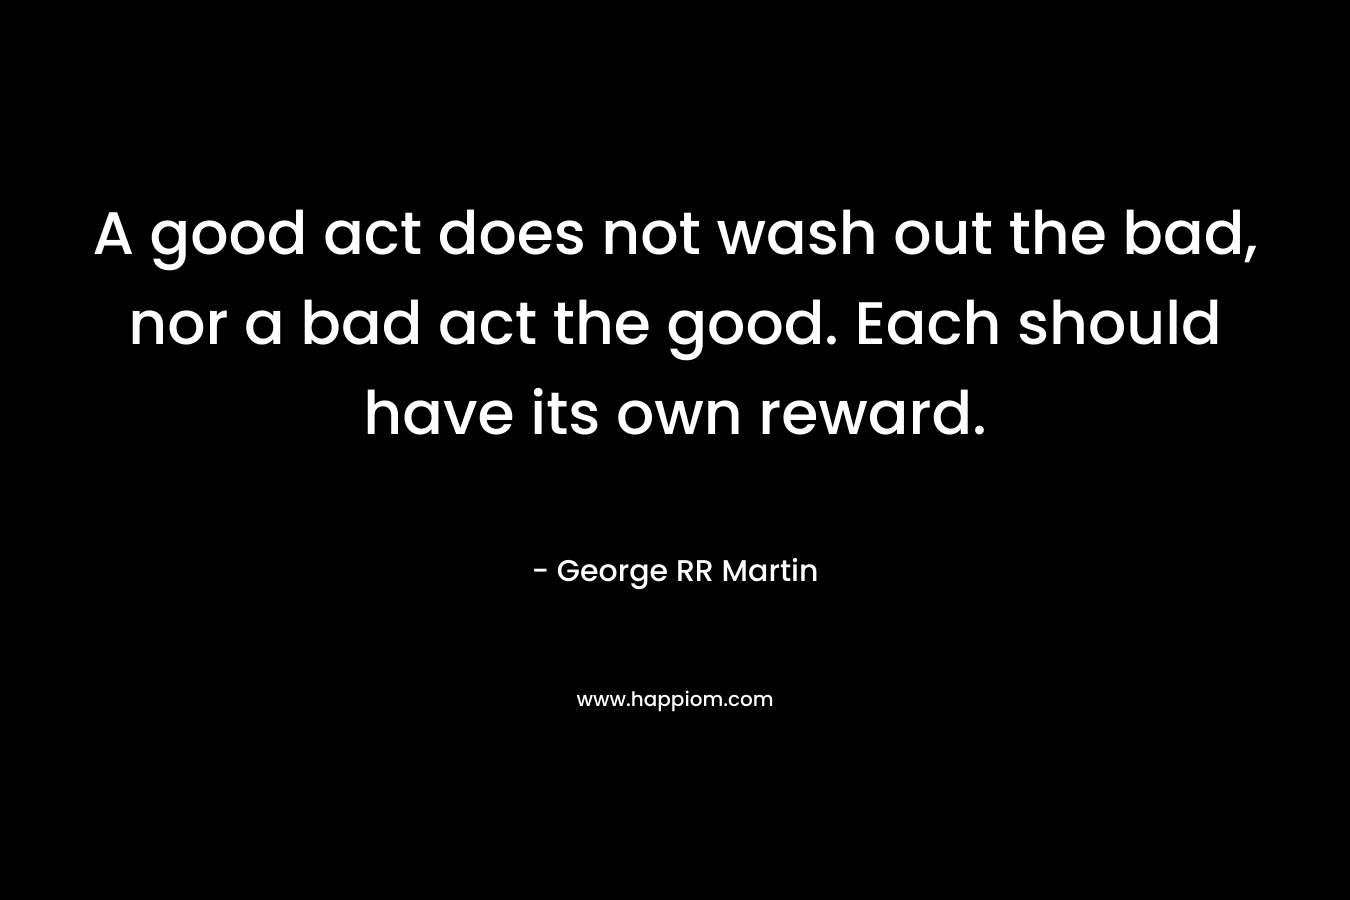 A good act does not wash out the bad, nor a bad act the good. Each should have its own reward. – George RR Martin